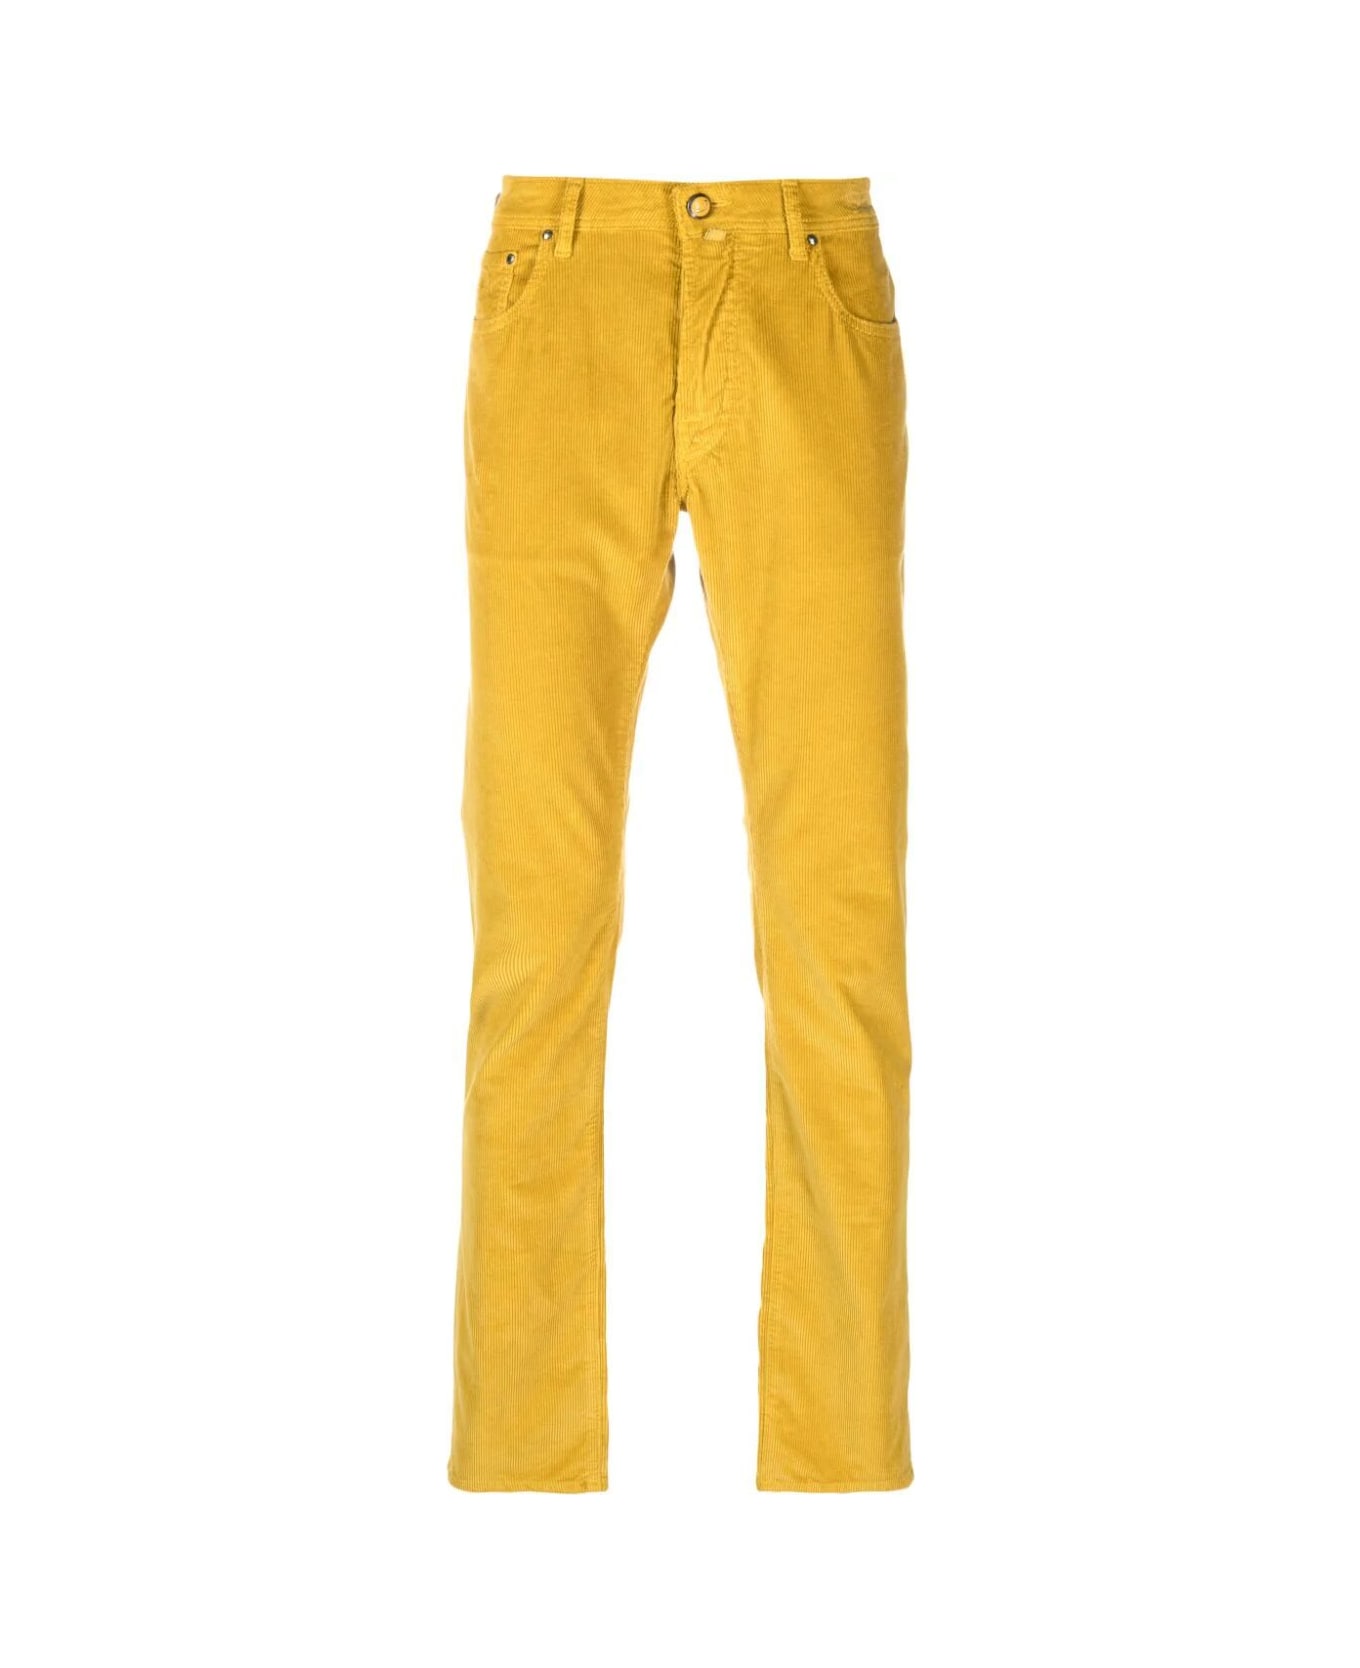 Jacob Cohen Bard Slim Fit Jeans - Golden Yellow ボトムス